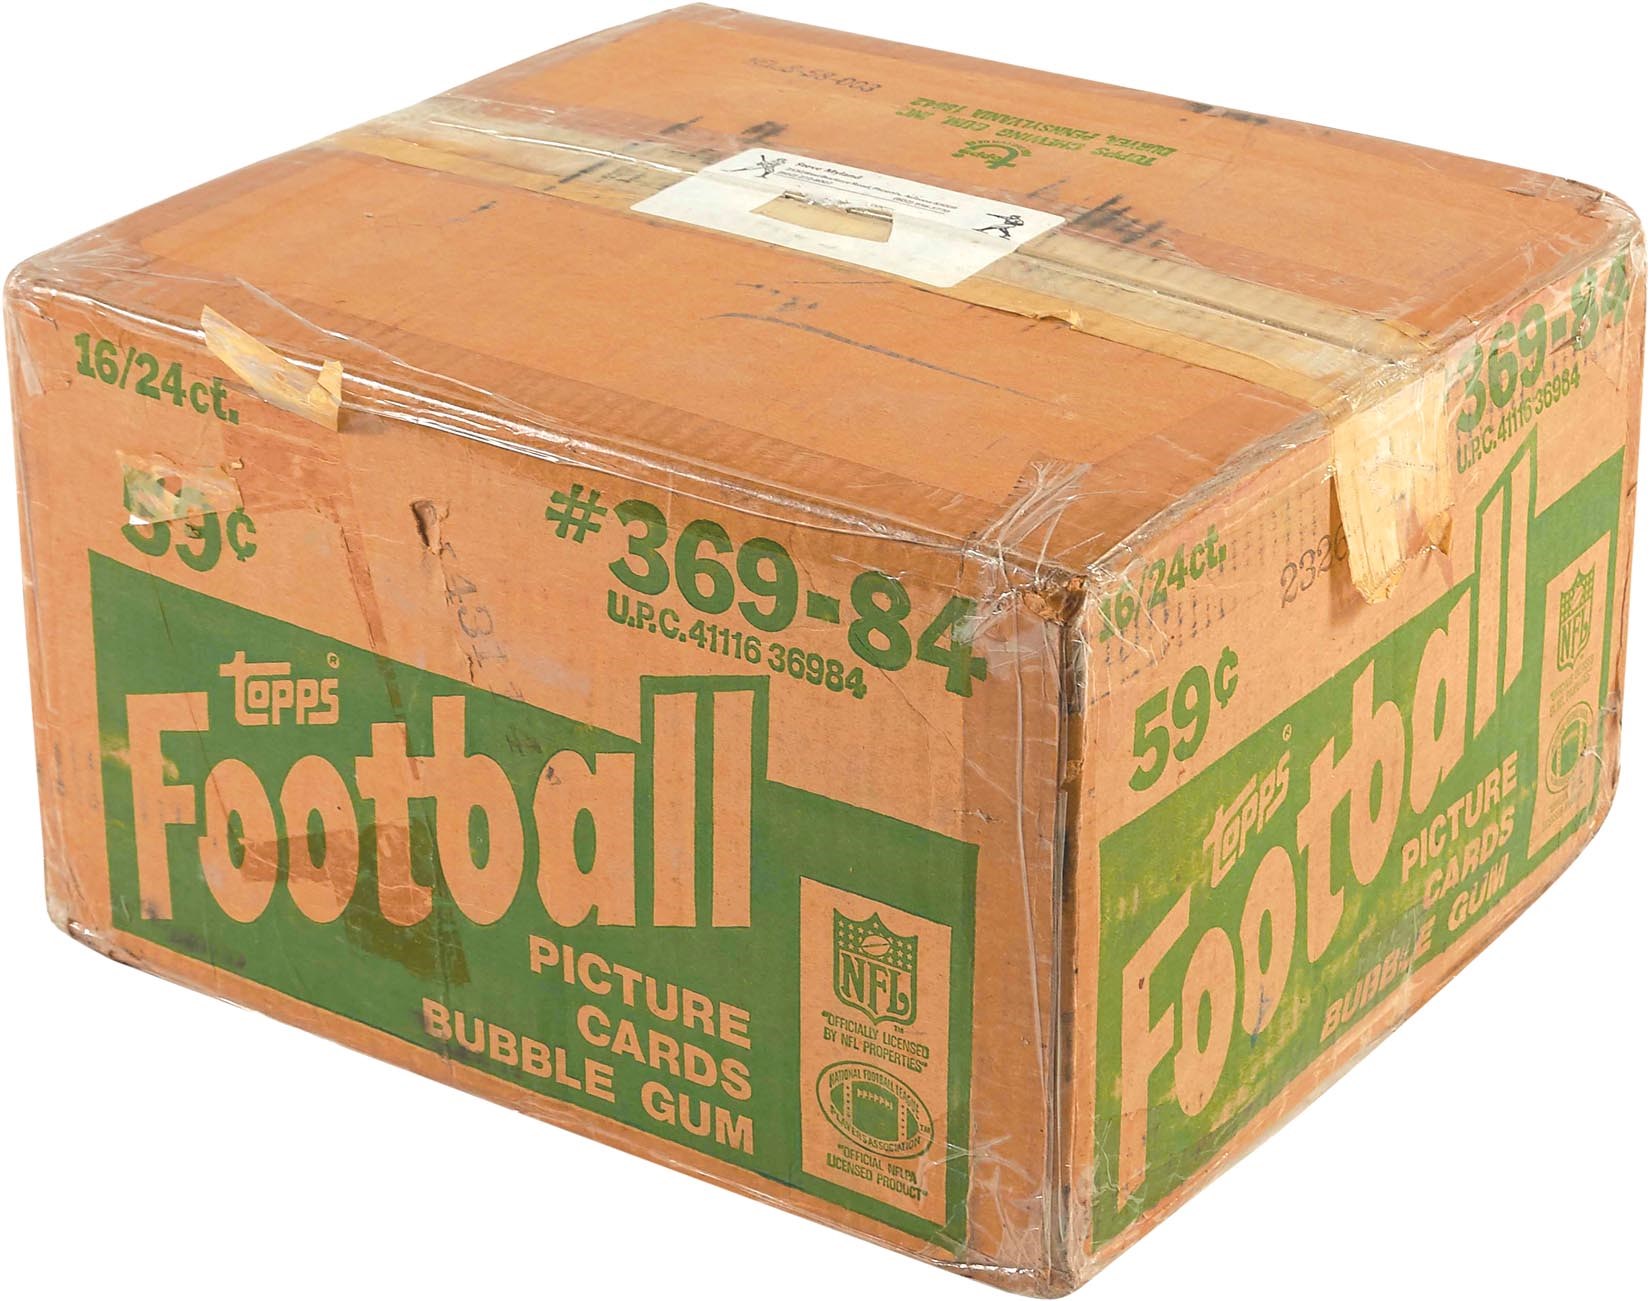 Unopened Wax Packs Boxes and Cases - 1984 Topps Football Unopened Cello Case